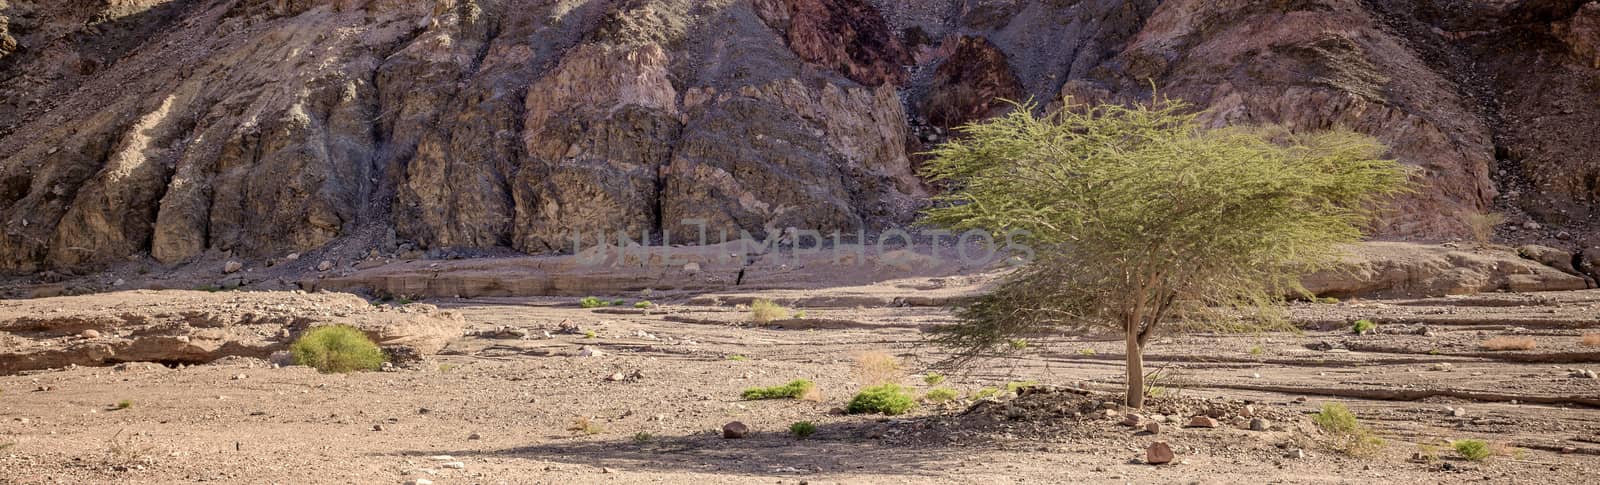 single green tree in the desert by compuinfoto